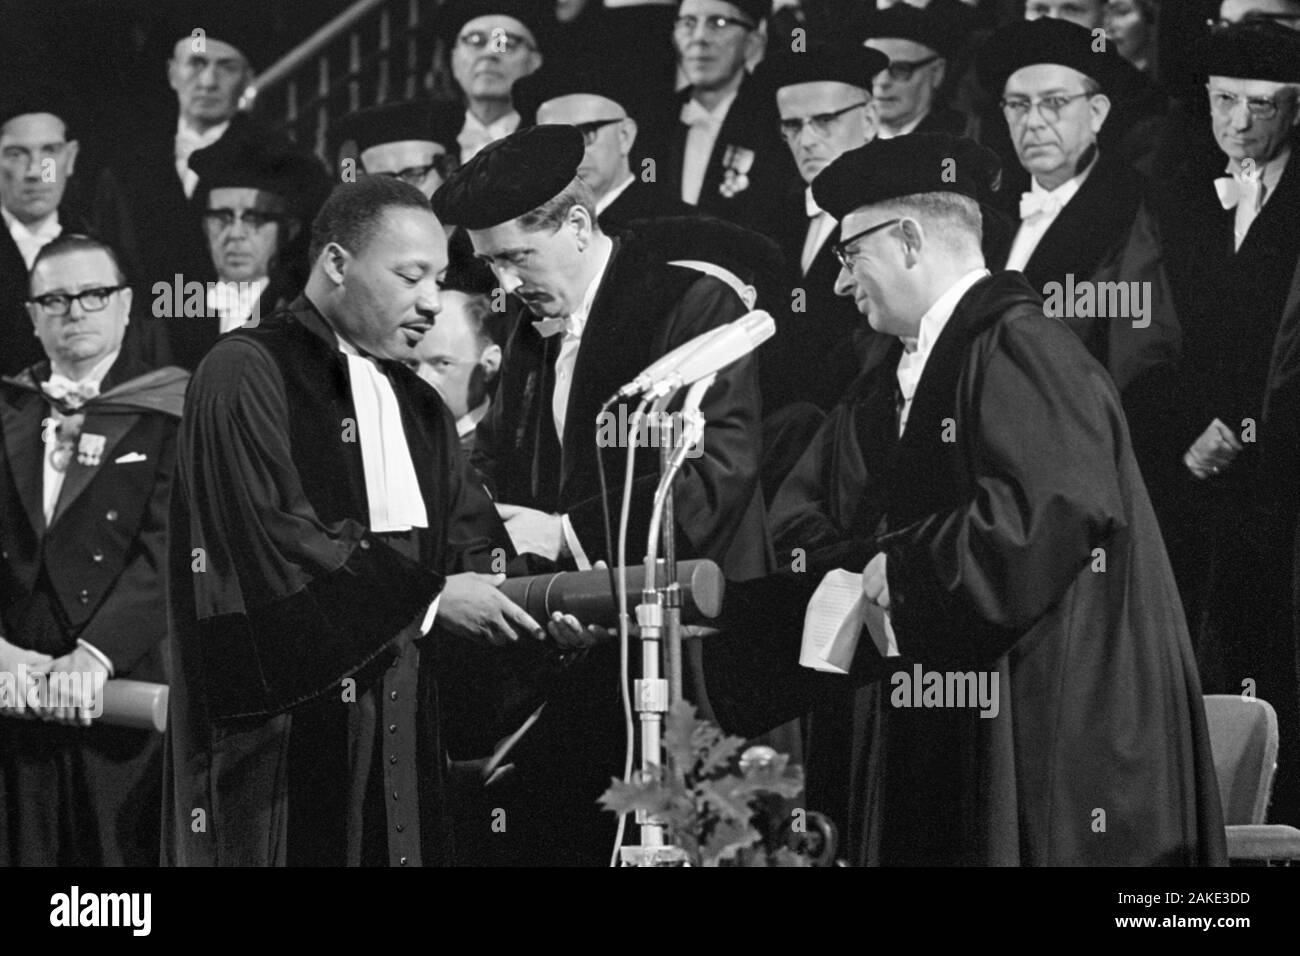 Dr. Martin Luther King, Jr. receiving an honorary doctorate in Social Science by the VU (Vrije Universiteit, 'Free University') in Amsterdam, North Holland on October 20, 1965. Stock Photo